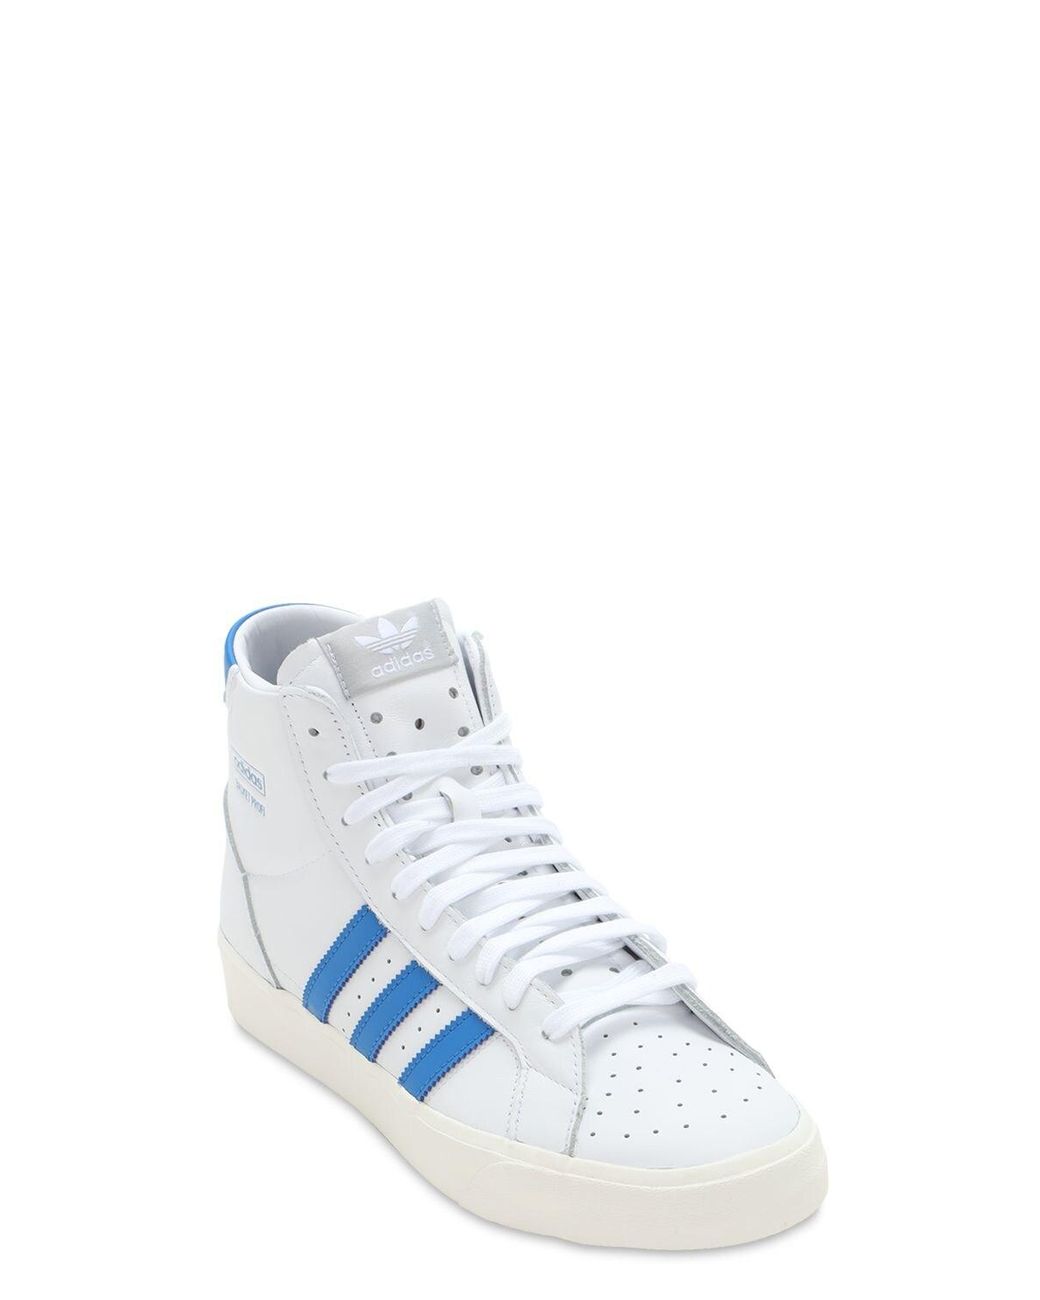 adidas Originals Leather White And Blue Basket Profi Sneakers for Men -  Save 56% - Lyst